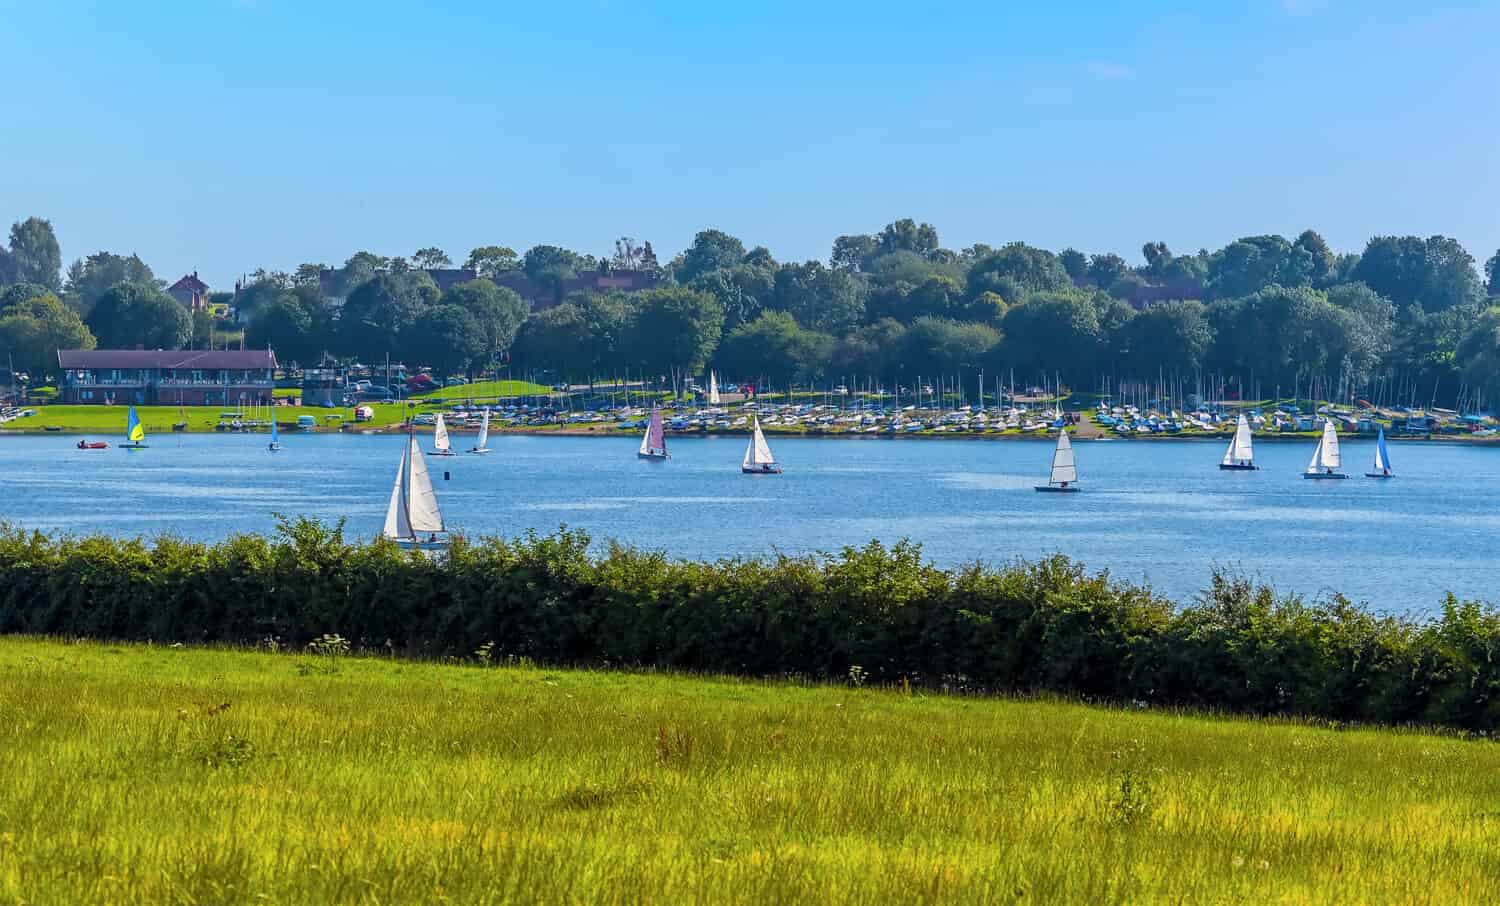 A flotilla of sailing boats on Rutland Water reservoir in summertime